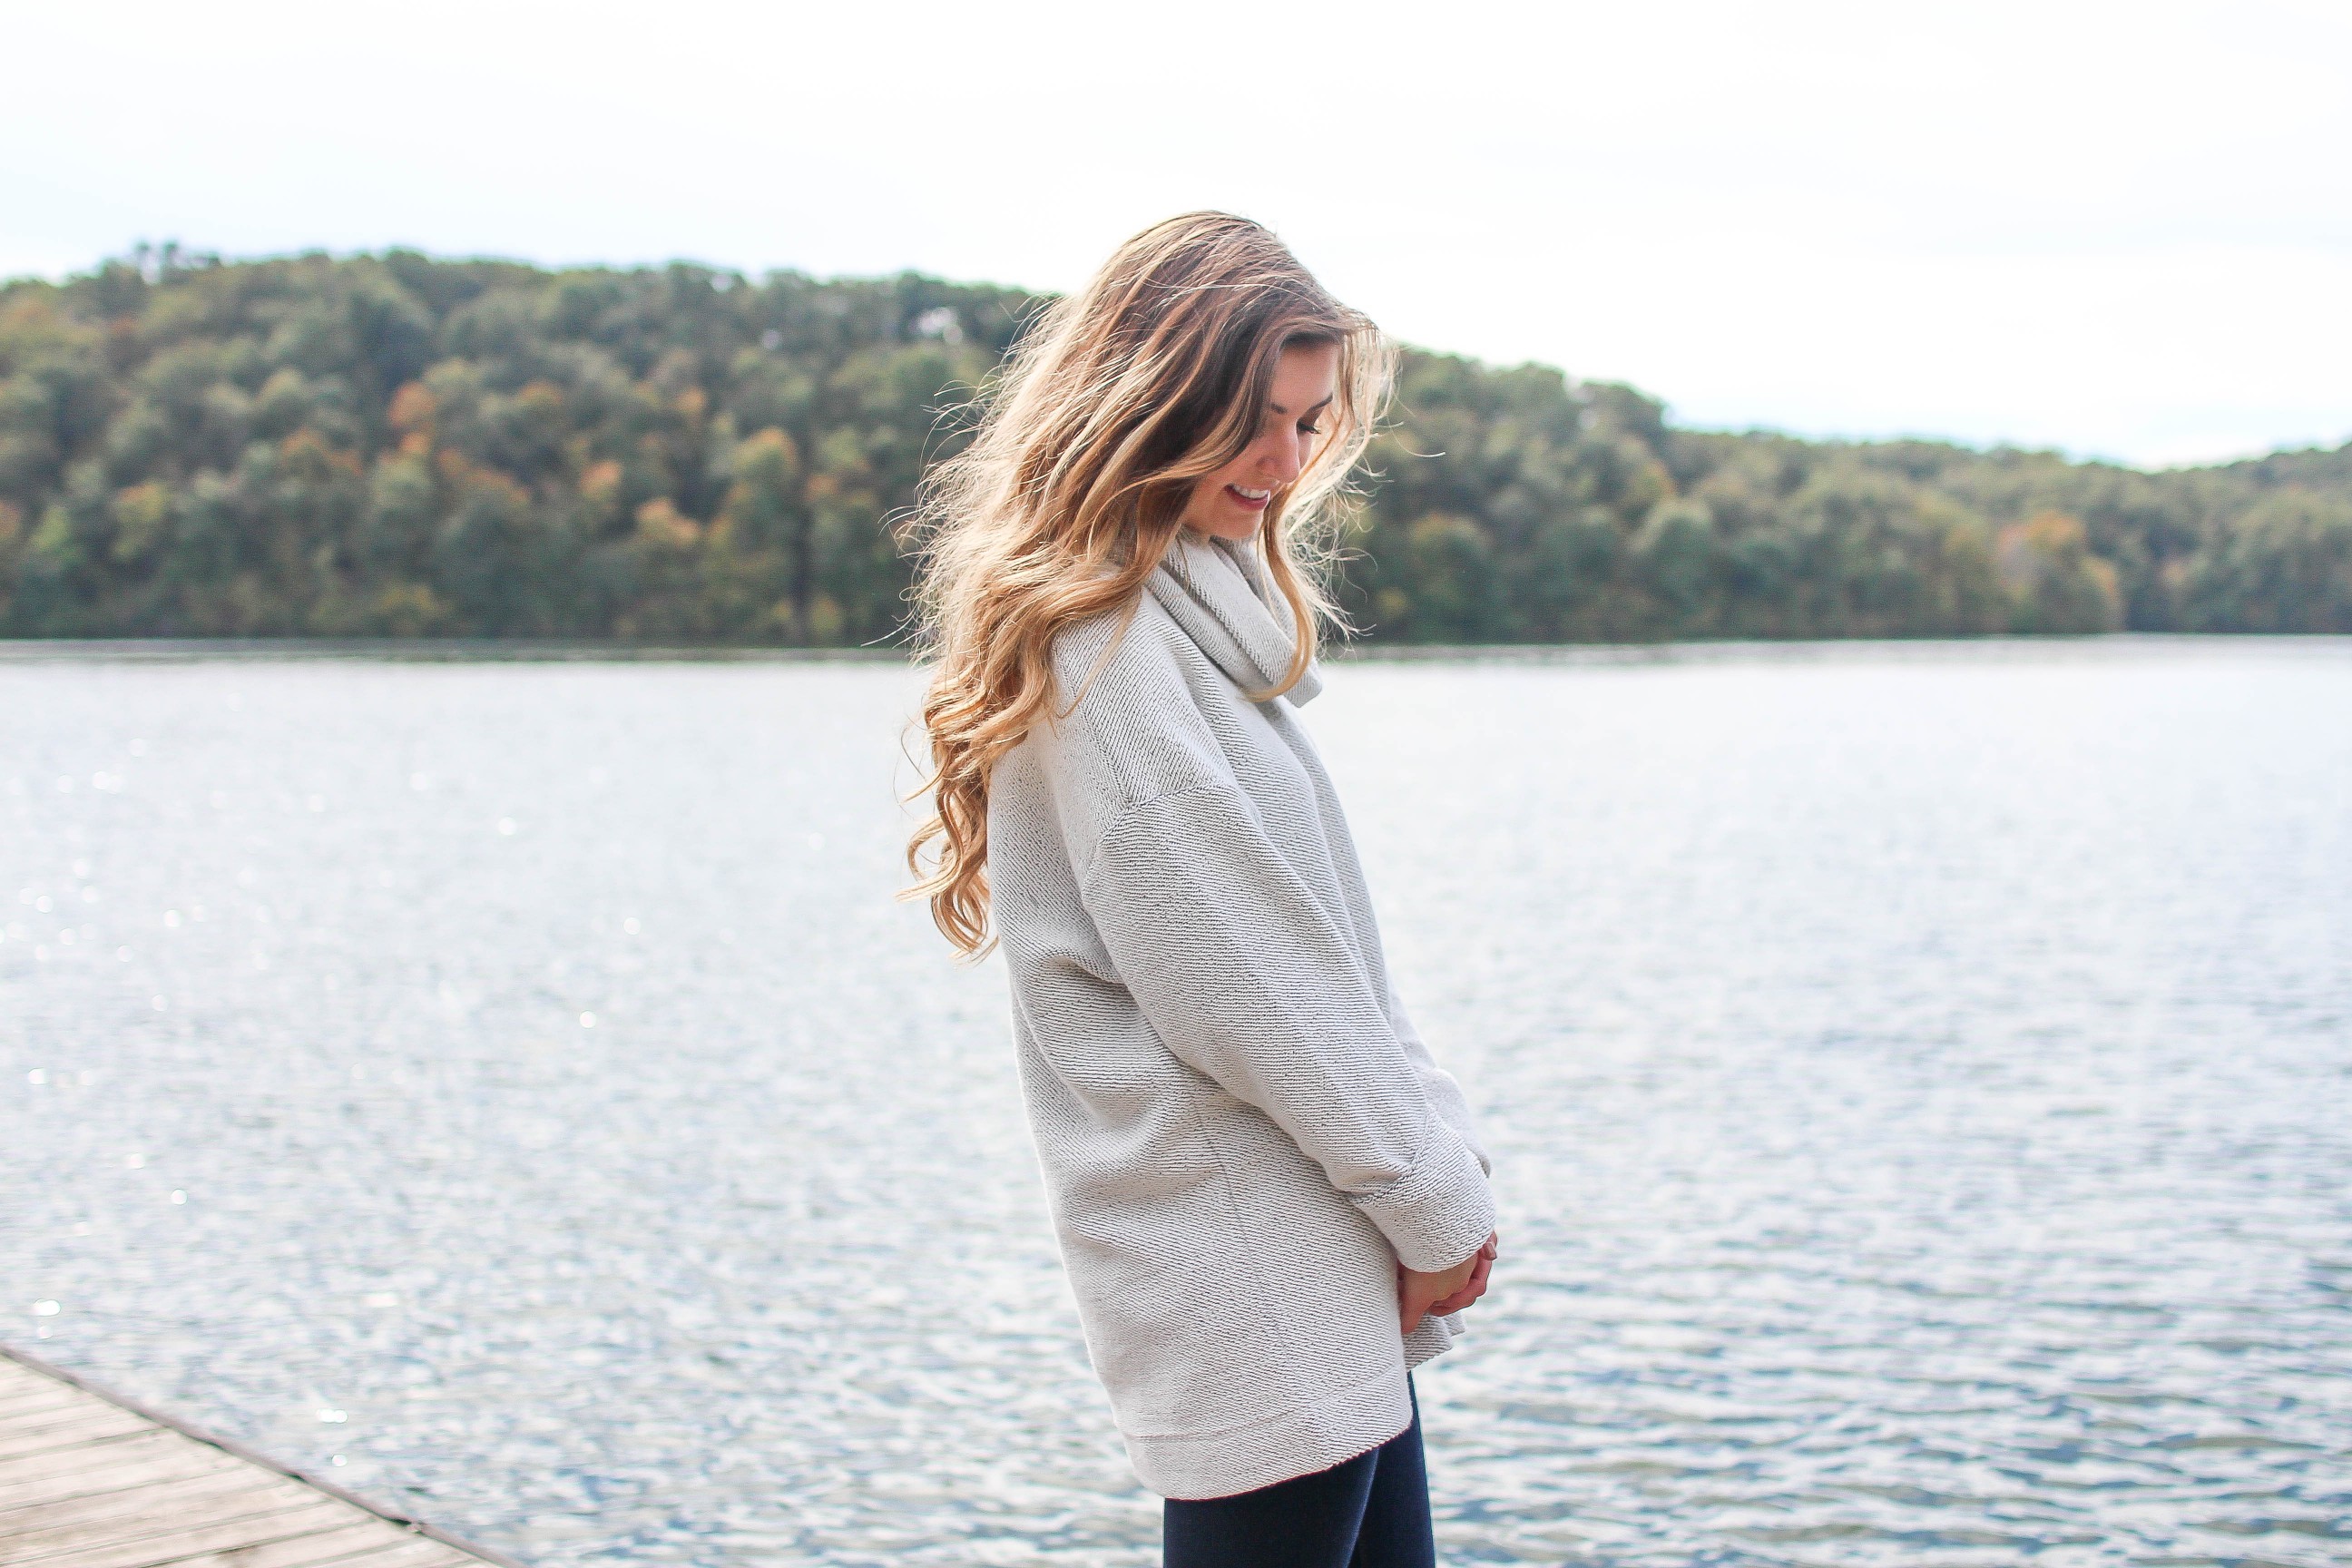 The perfect sweater that you NEED (inexpensive & comfy) on the blog daily dose of charm by lauren lindmark dailydoseofcharm.com